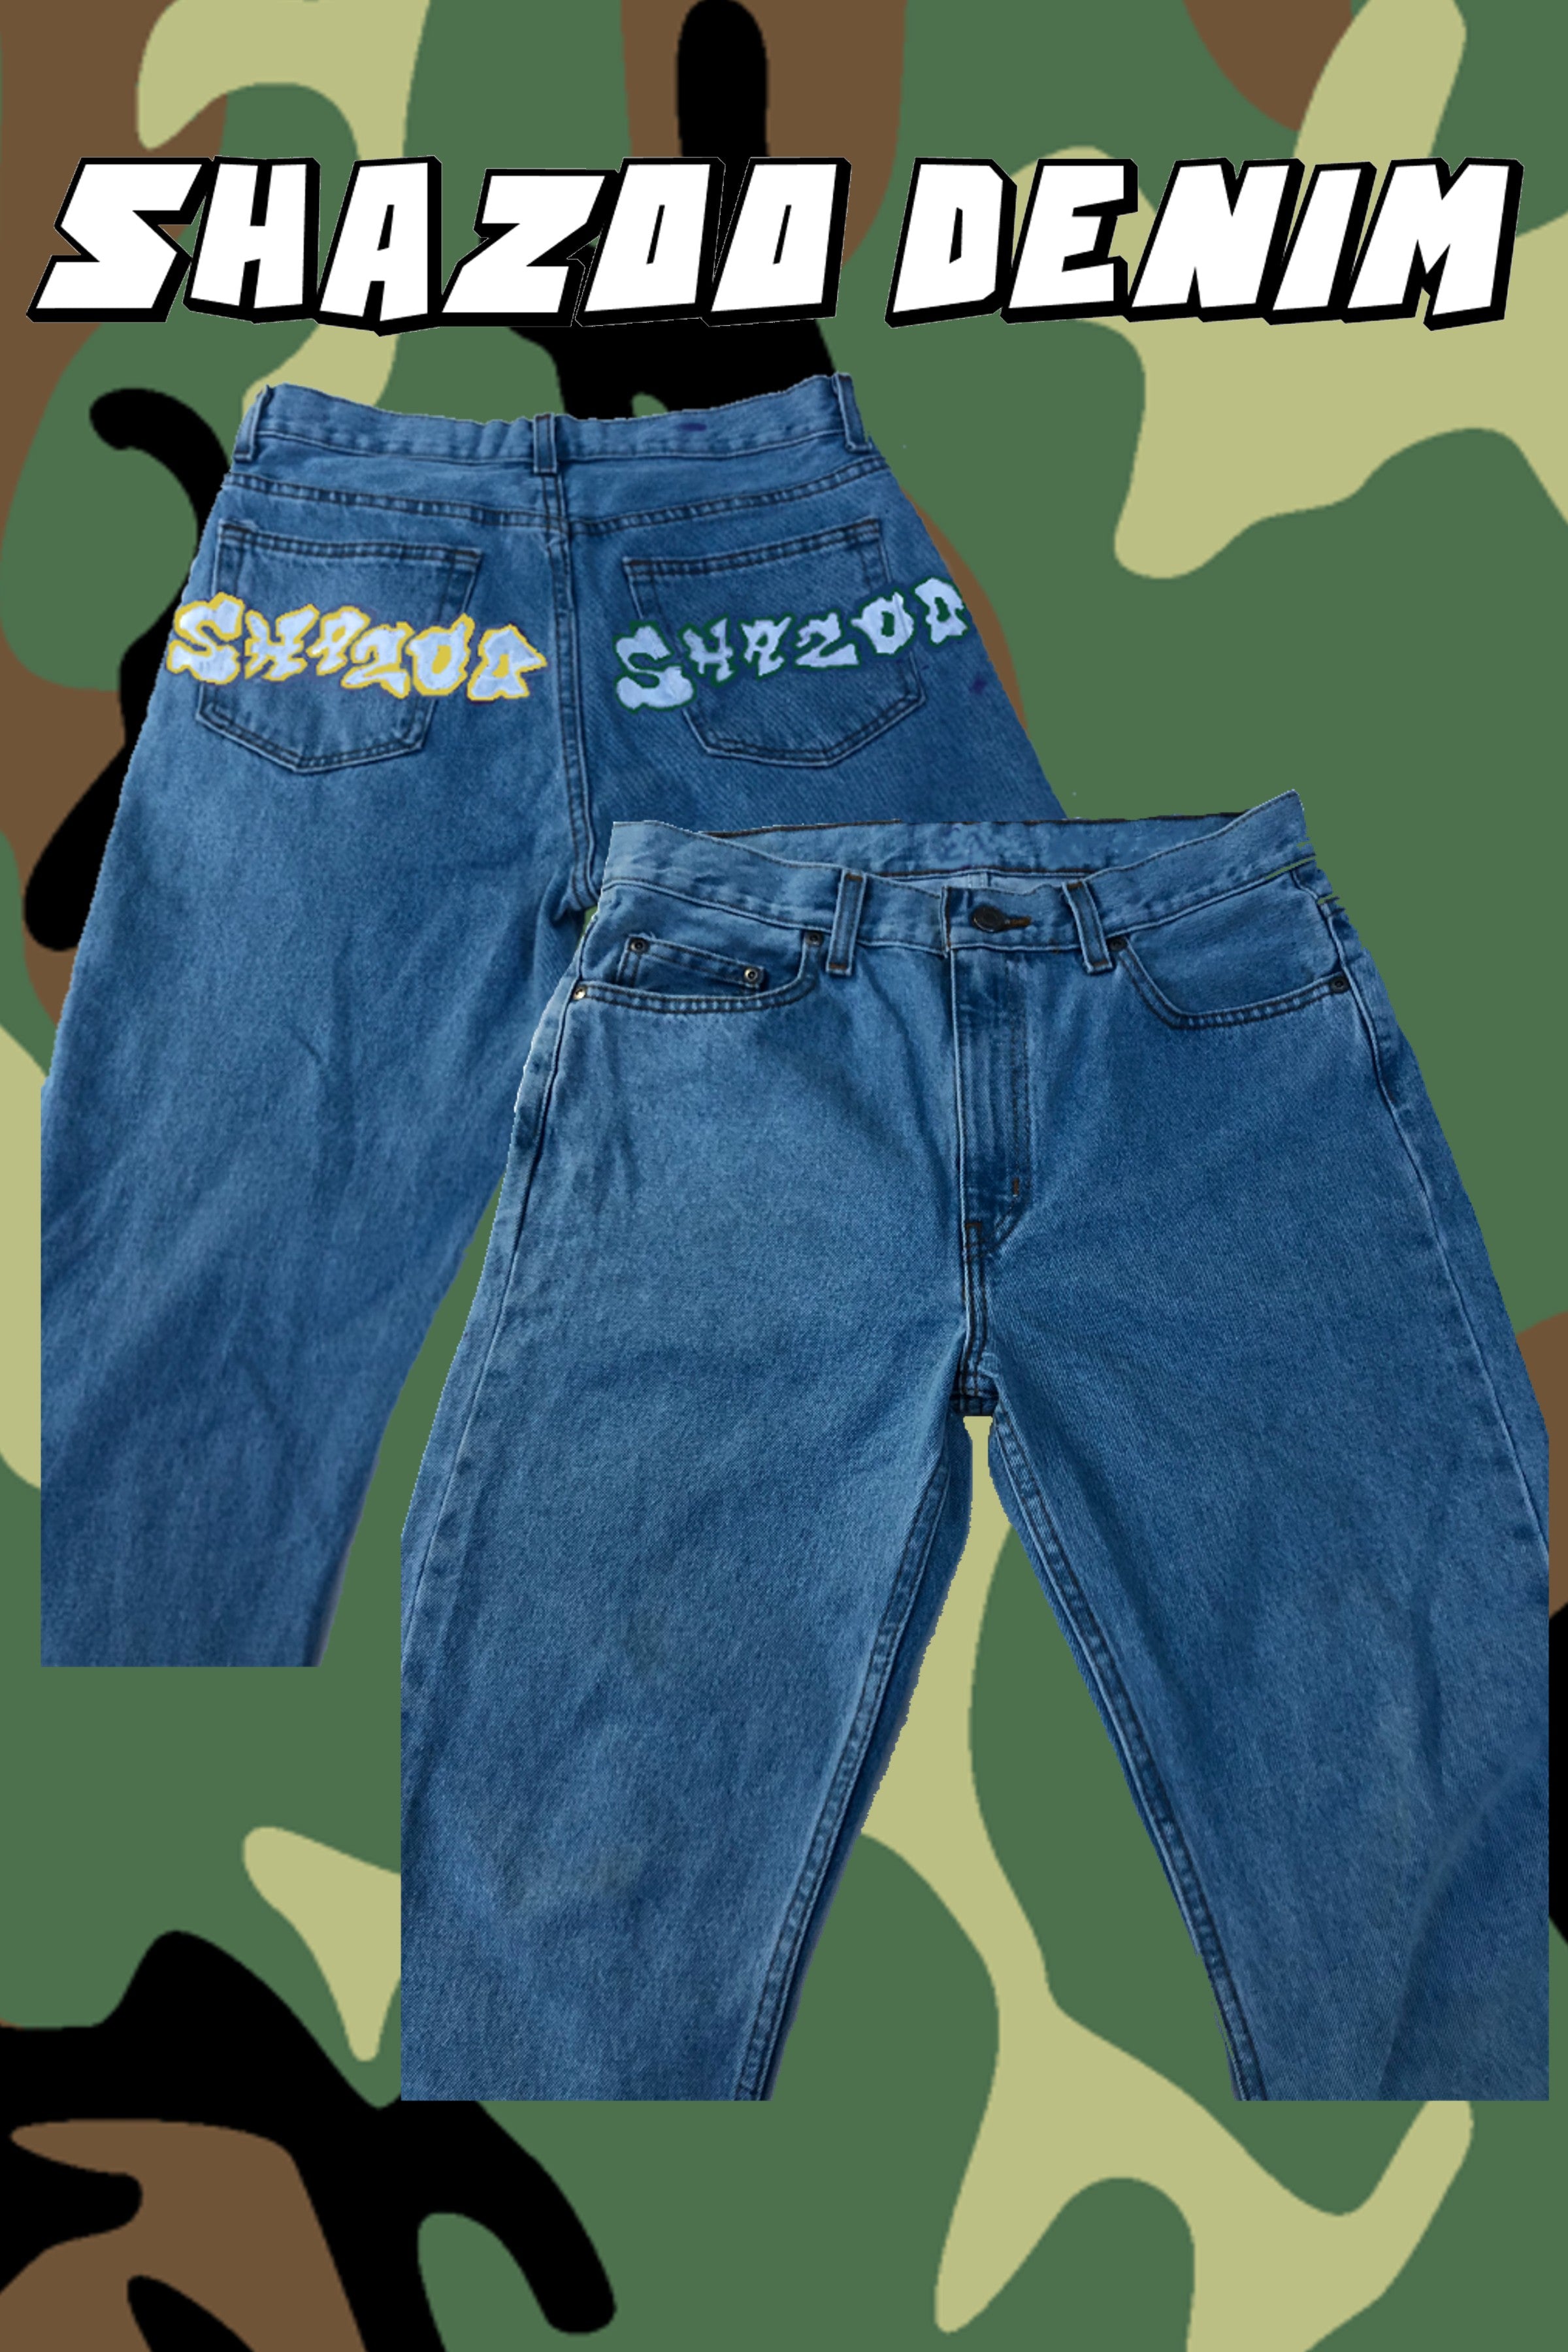 Hand painted regular fit SHAZOO denim jeans yellow and green SIZE UP 2-3  TIMES FOR BAGGY LOOK